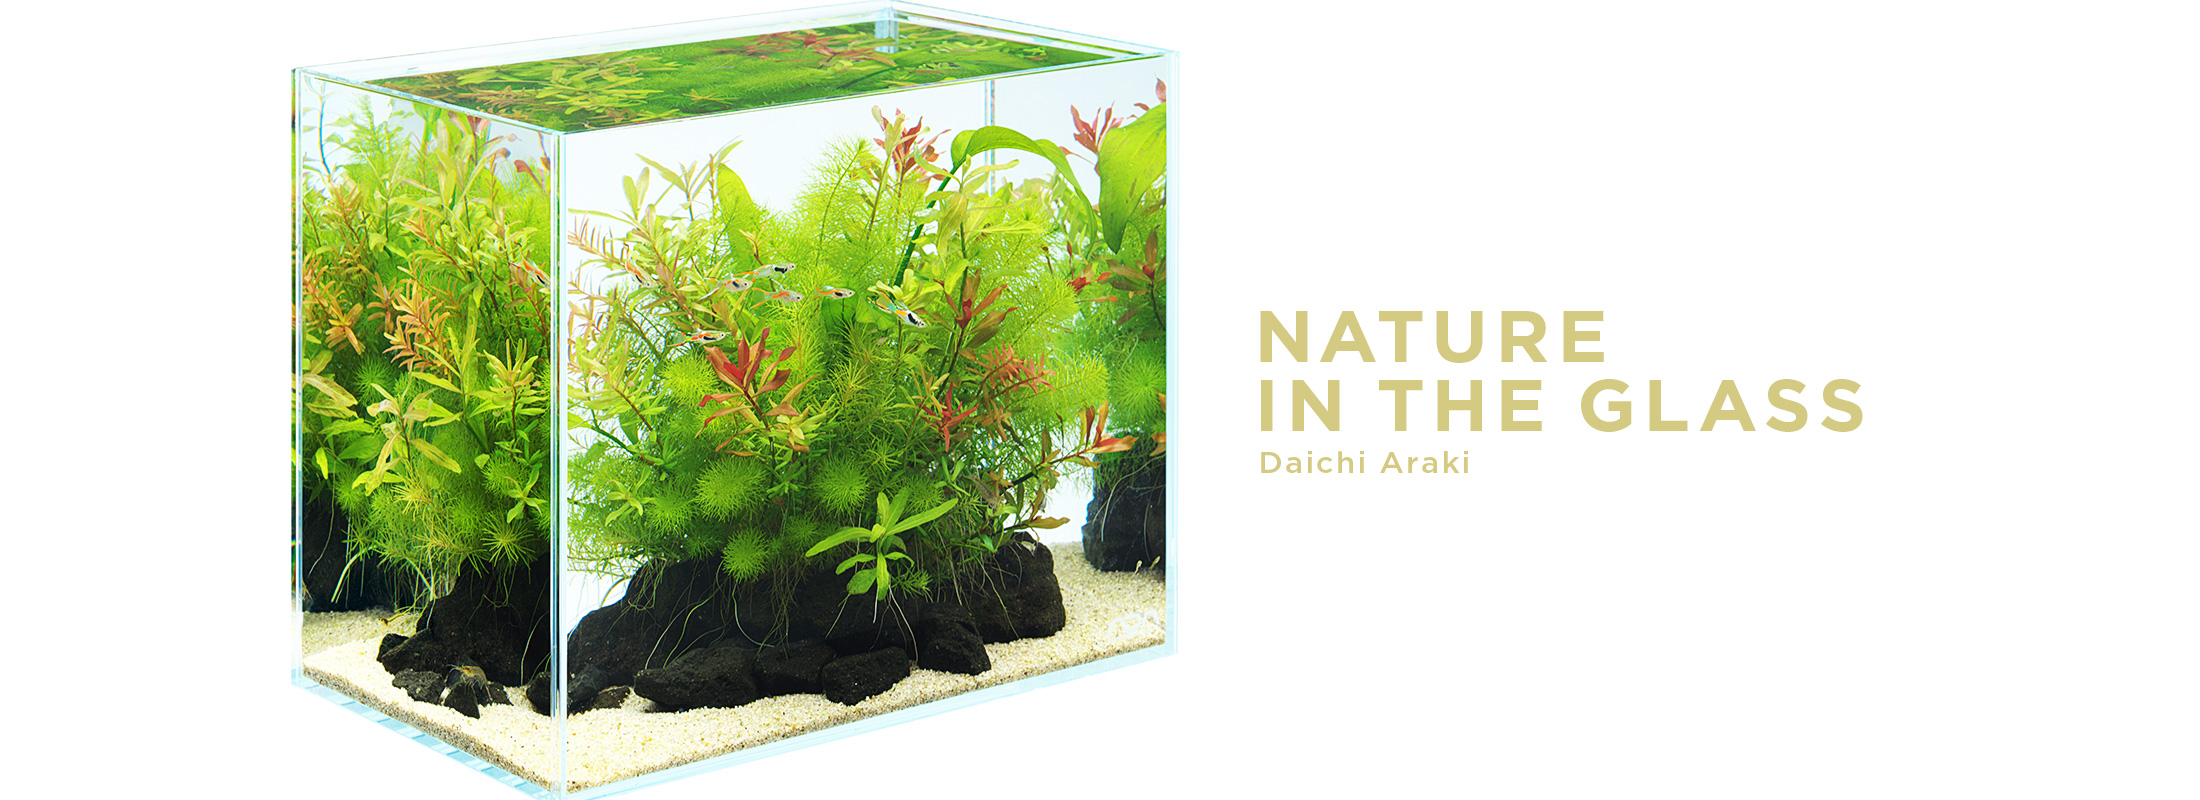 NATURE IN THE GLASS ‘A bouquet of aquatic plants’